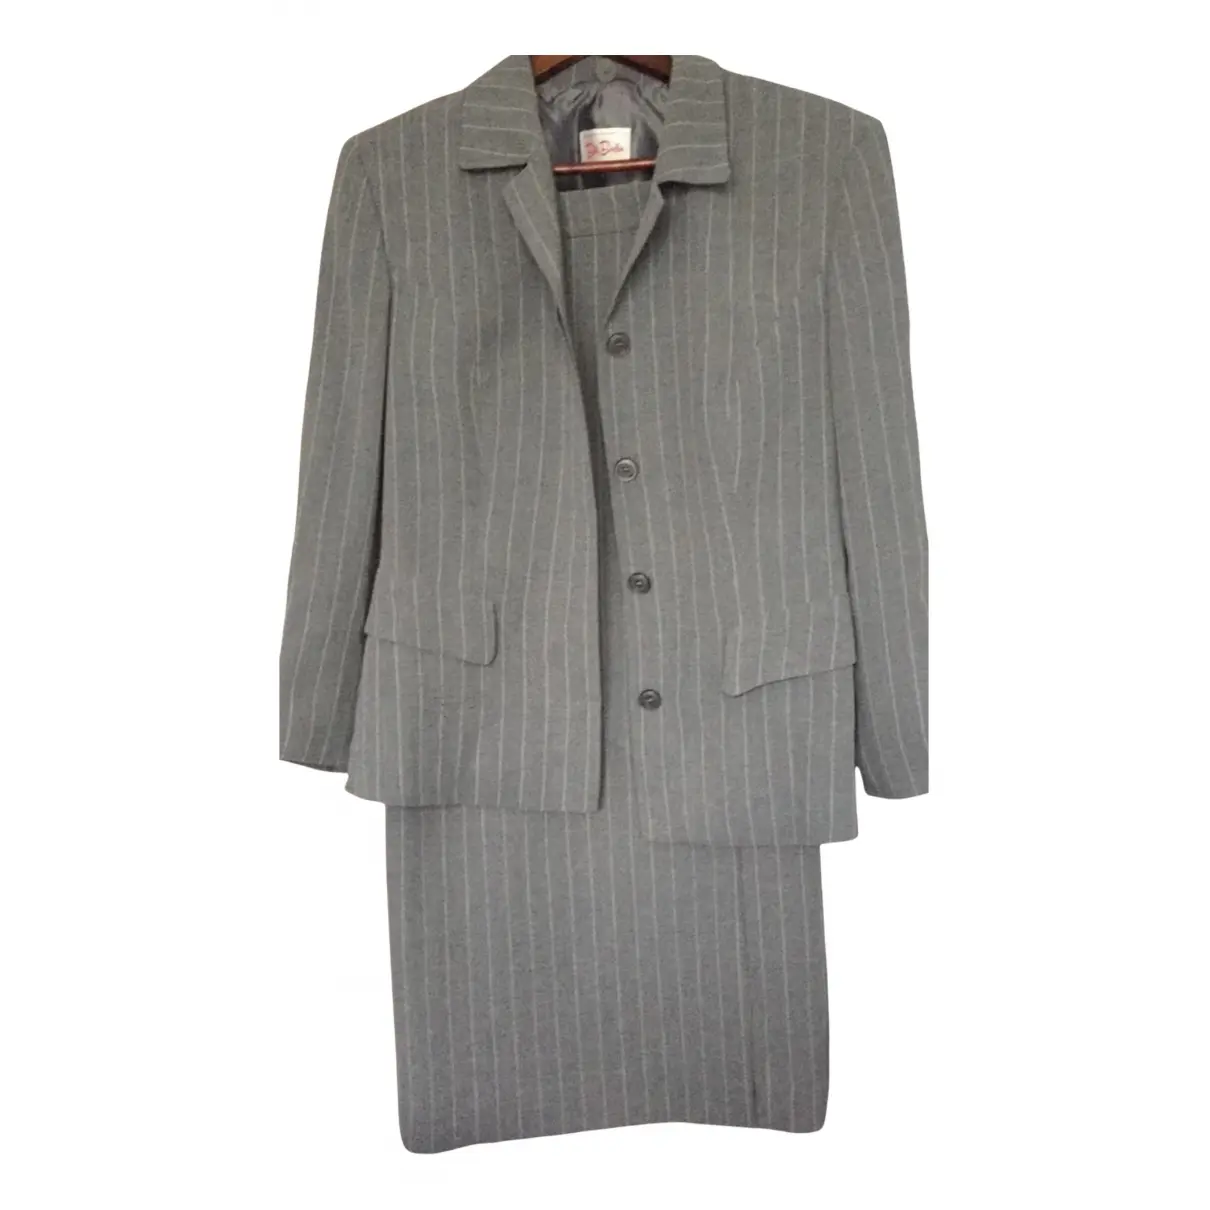 Suit jacket BETTY BARCLAY - Vintage